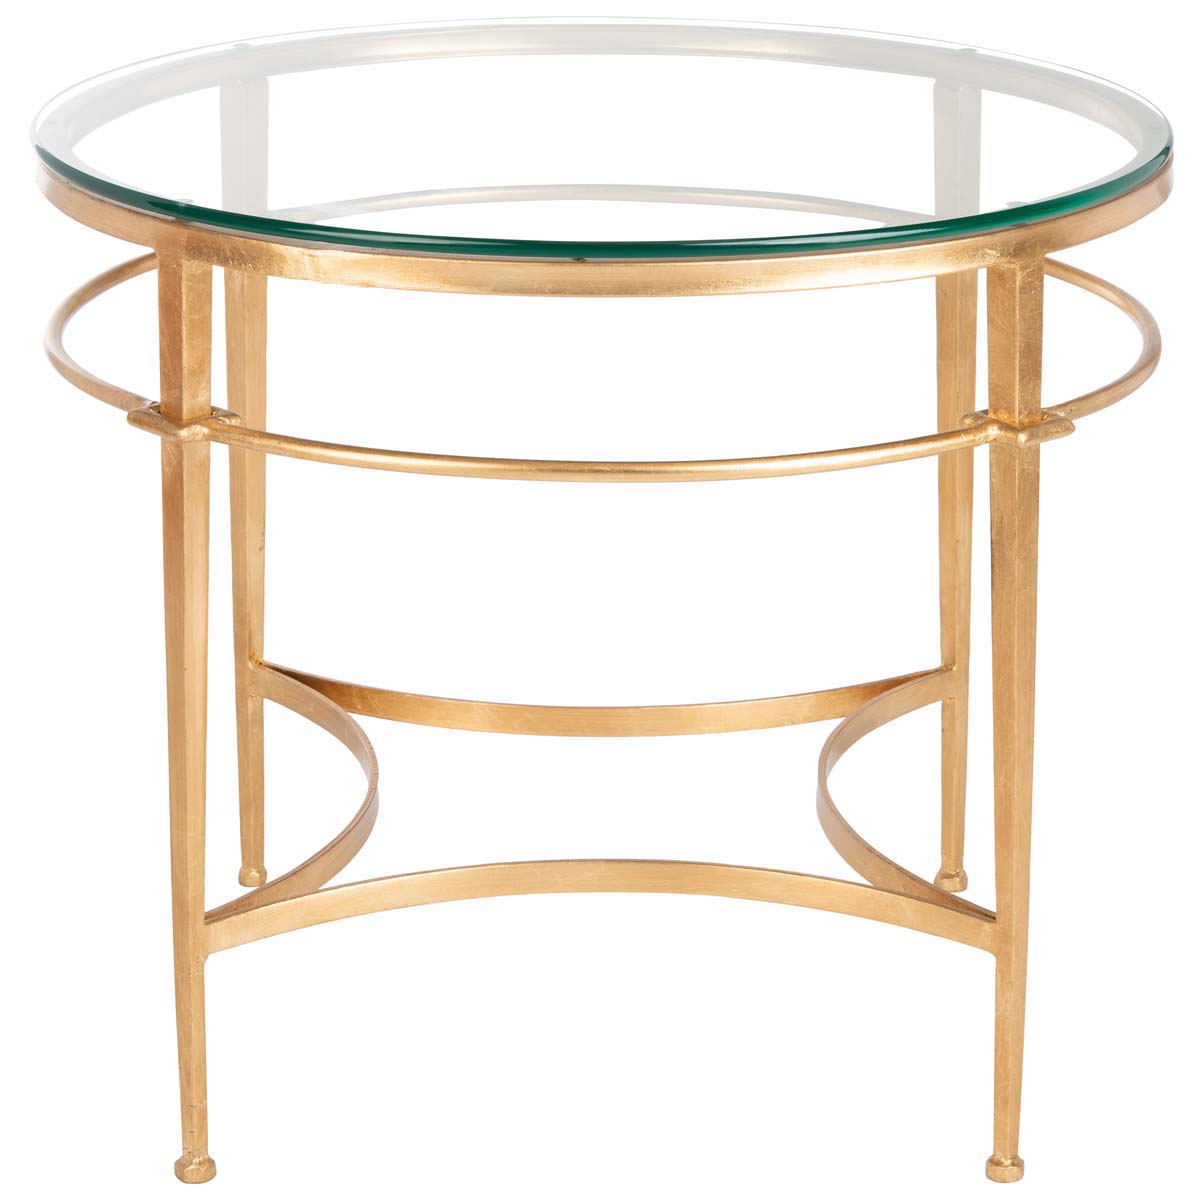 Safavieh Couture Ingmar Round Antique Gold Glass Side Table , AMH8301 - Gold / Glass